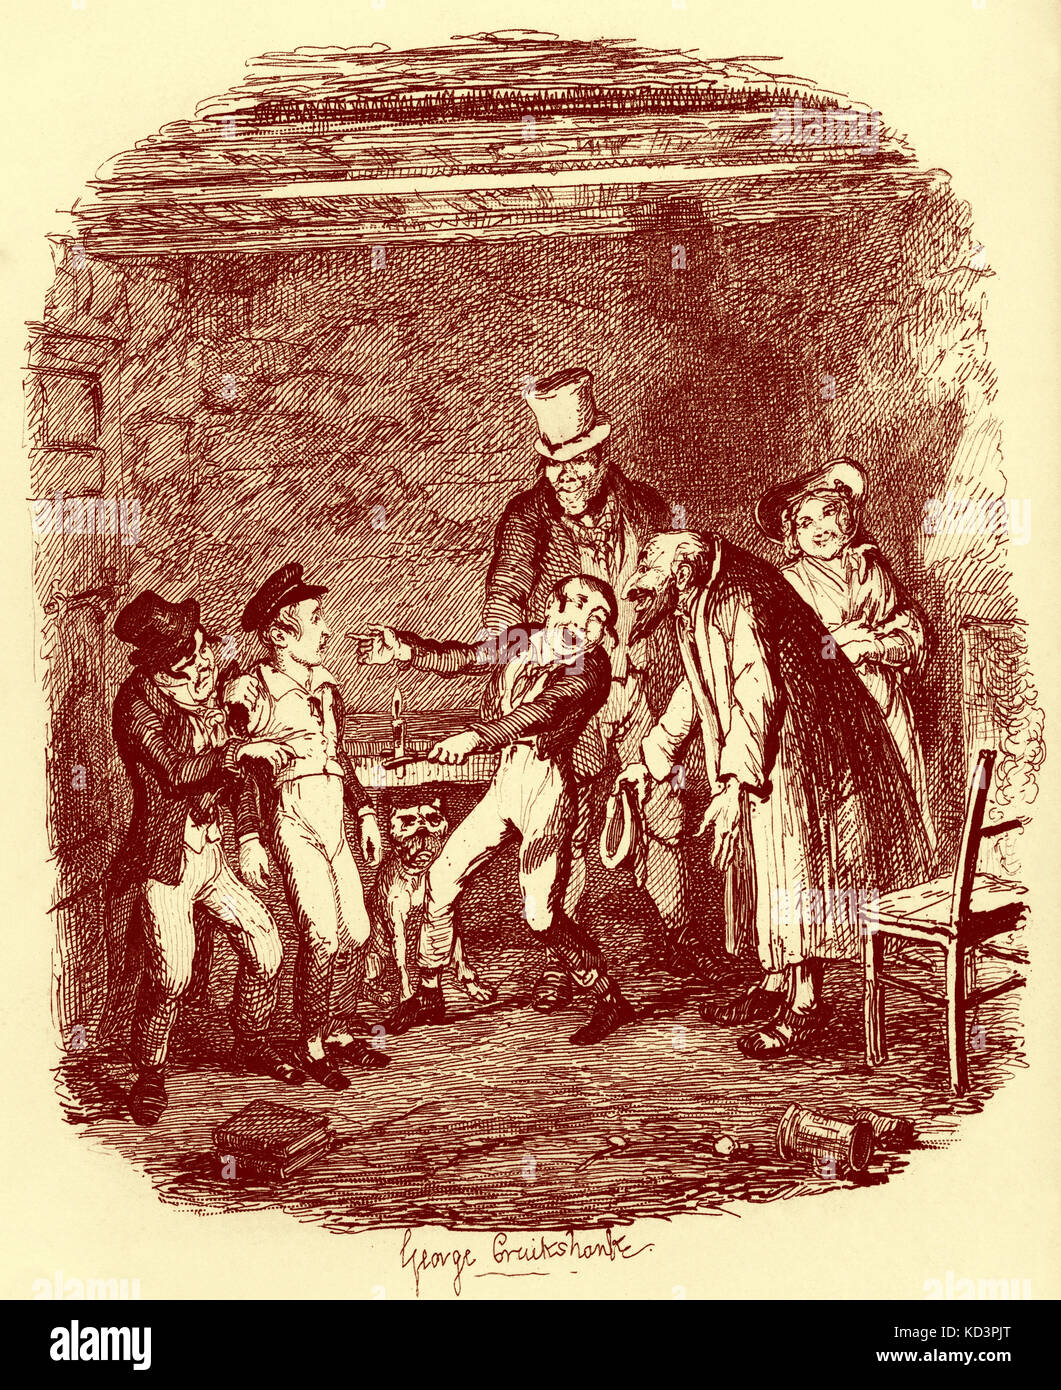 Charles Dickens 's 'The Adventures of Oliver Twist' : Oliver's reception by Fagin and the boys after Nancy forced him to return. English novelist 7 February 1812 – 9 June 1870.  Illustration by George Cruikshank. Stock Photo